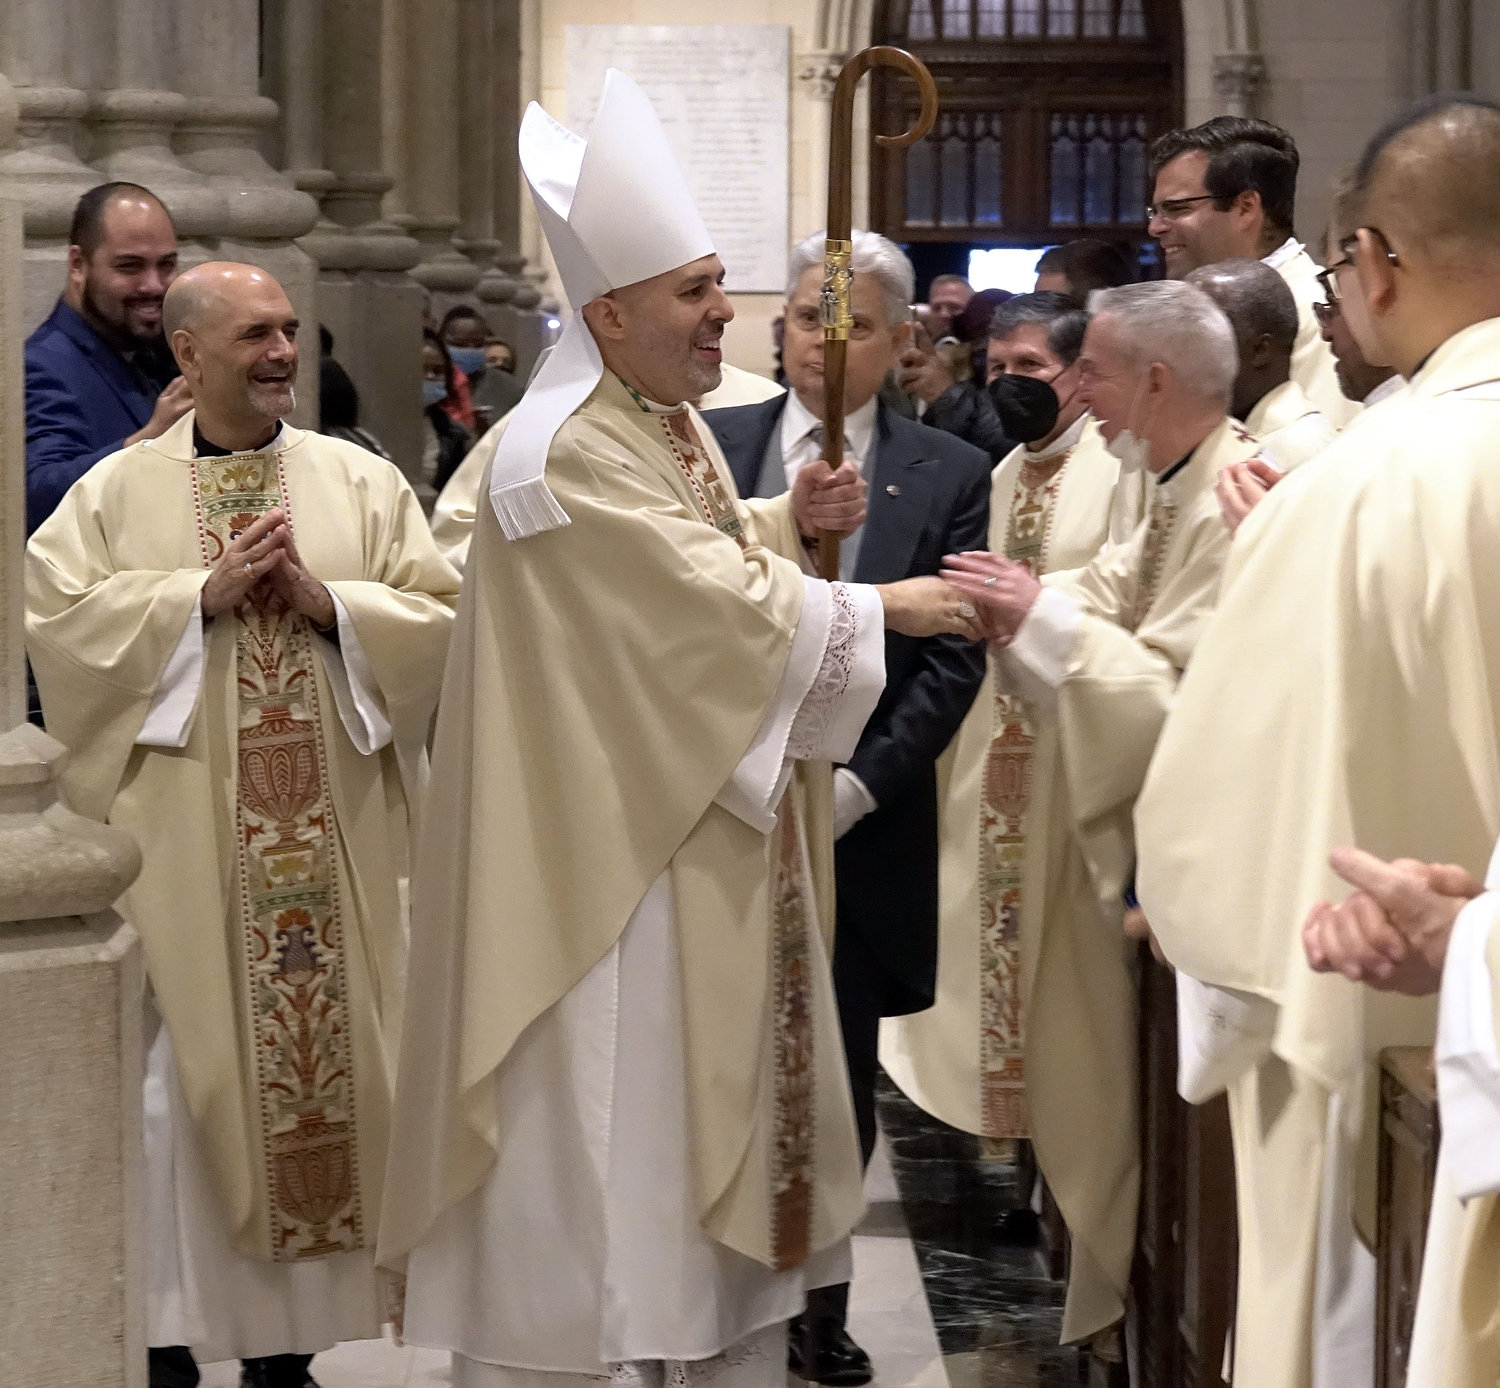 Auxiliary Bishop Joseph A. Espaillat greets clergy after his ordination. With him at left is Father Arthur Mastrolia, pastor of St. Clare’s parish on Staten Island.